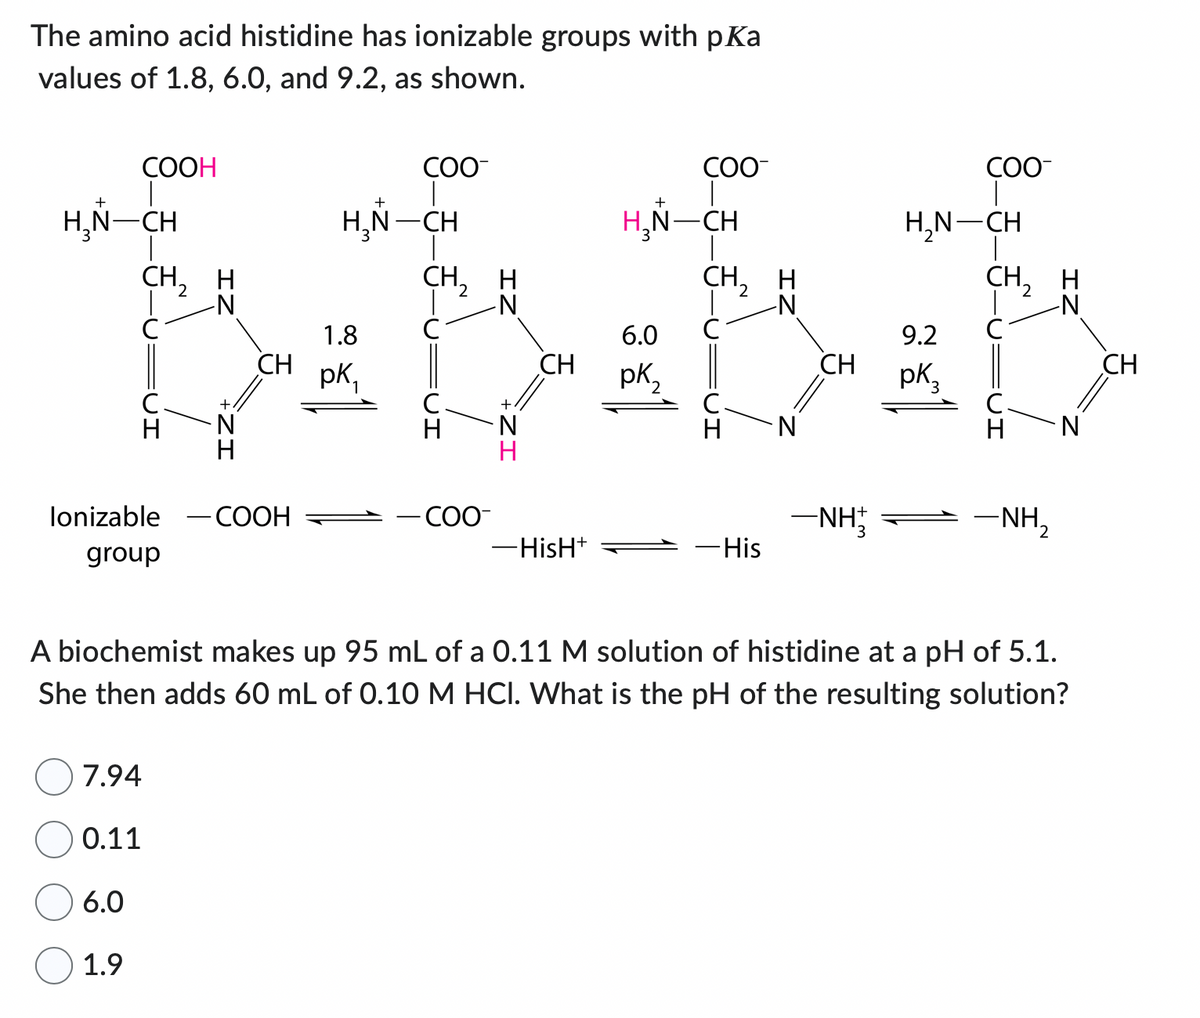 The amino acid histidine has ionizable groups with pKa
values of 1.8, 6.0, and 9.2, as shown.
COOH
H₂N-CH
CH₂ H
2
-N
H
lonizable
group
6.0
1.9
7.94
0.11
N
H
CH
-COOH
H₂N-CH
|
CH₂ H
2
N
1.8
COO-
I
pk₁
C
H
COO-
CH
-HisH+
H₂N-CH
6.0
COO-
pk ₂.
CH₂ H
2
H
-His
N
CH
COO™
H₂N-CH
9.2
pk 3
CH₂ H
-N
с
H
—NH — —NH,
A biochemist makes up 95 mL of a 0.11 M solution of histidine at a pH of 5.1.
She then adds 60 mL of 0.10 M HCI. What is the pH of the resulting solution?
N
CH